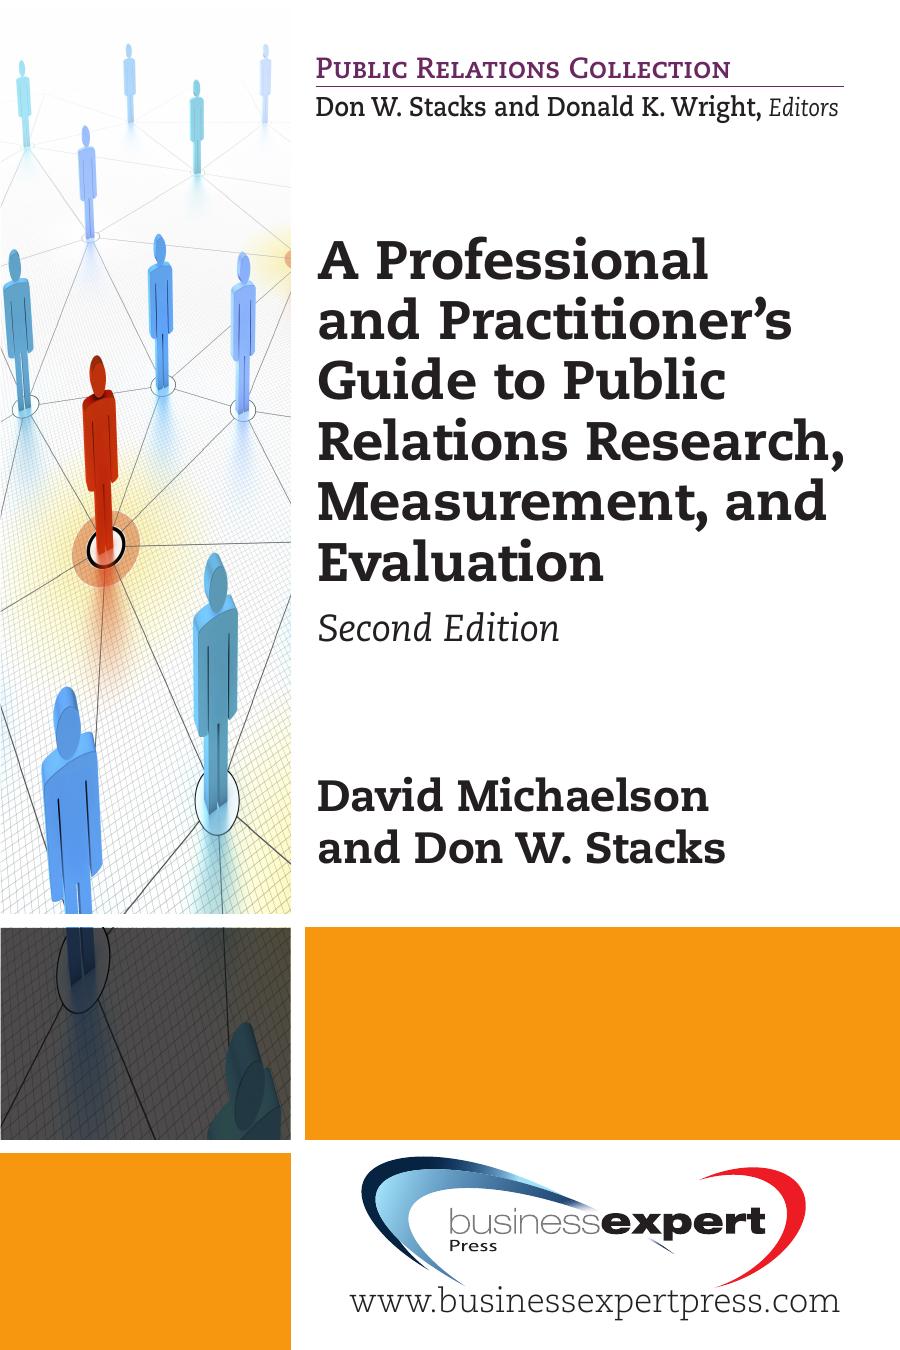 A Professional and Practitioner’s Guide to Public Relations Research, Measurement, and Evaluation: Second Edition